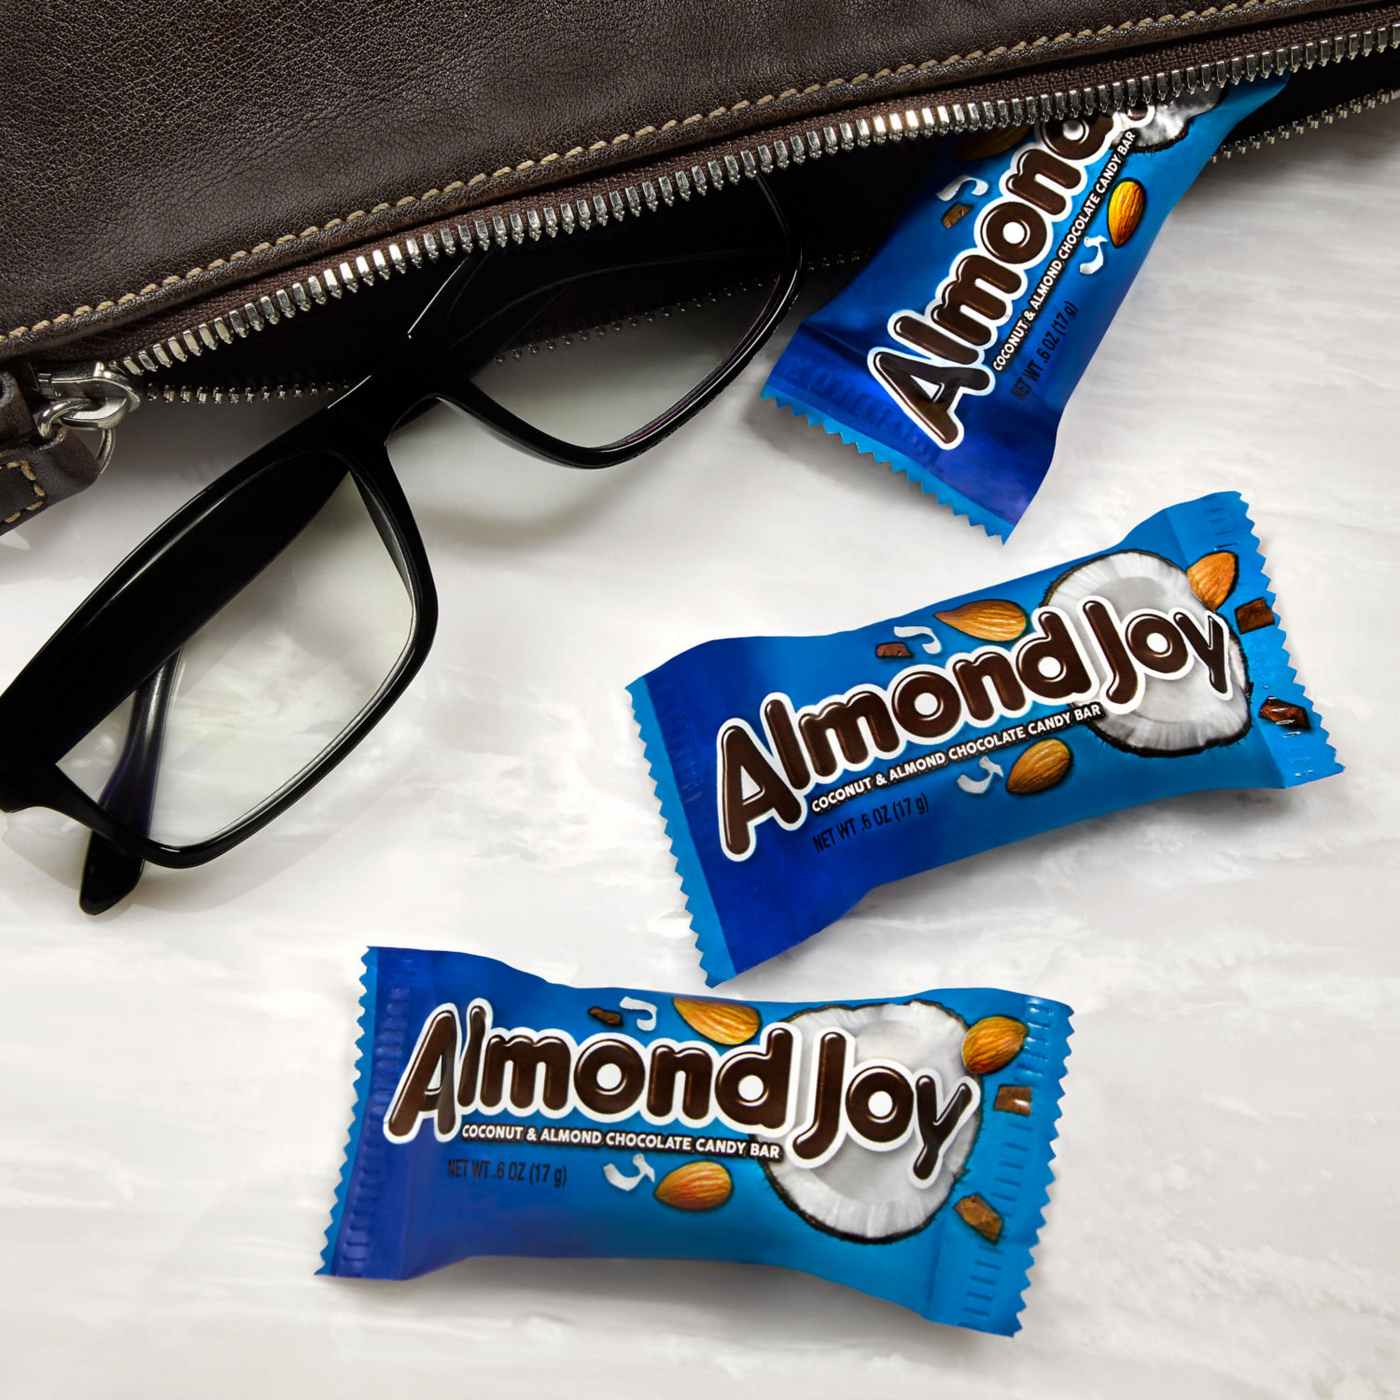 Almond Joy Coconut & Almond Chocolate Snack Size Candy Bars; image 3 of 7